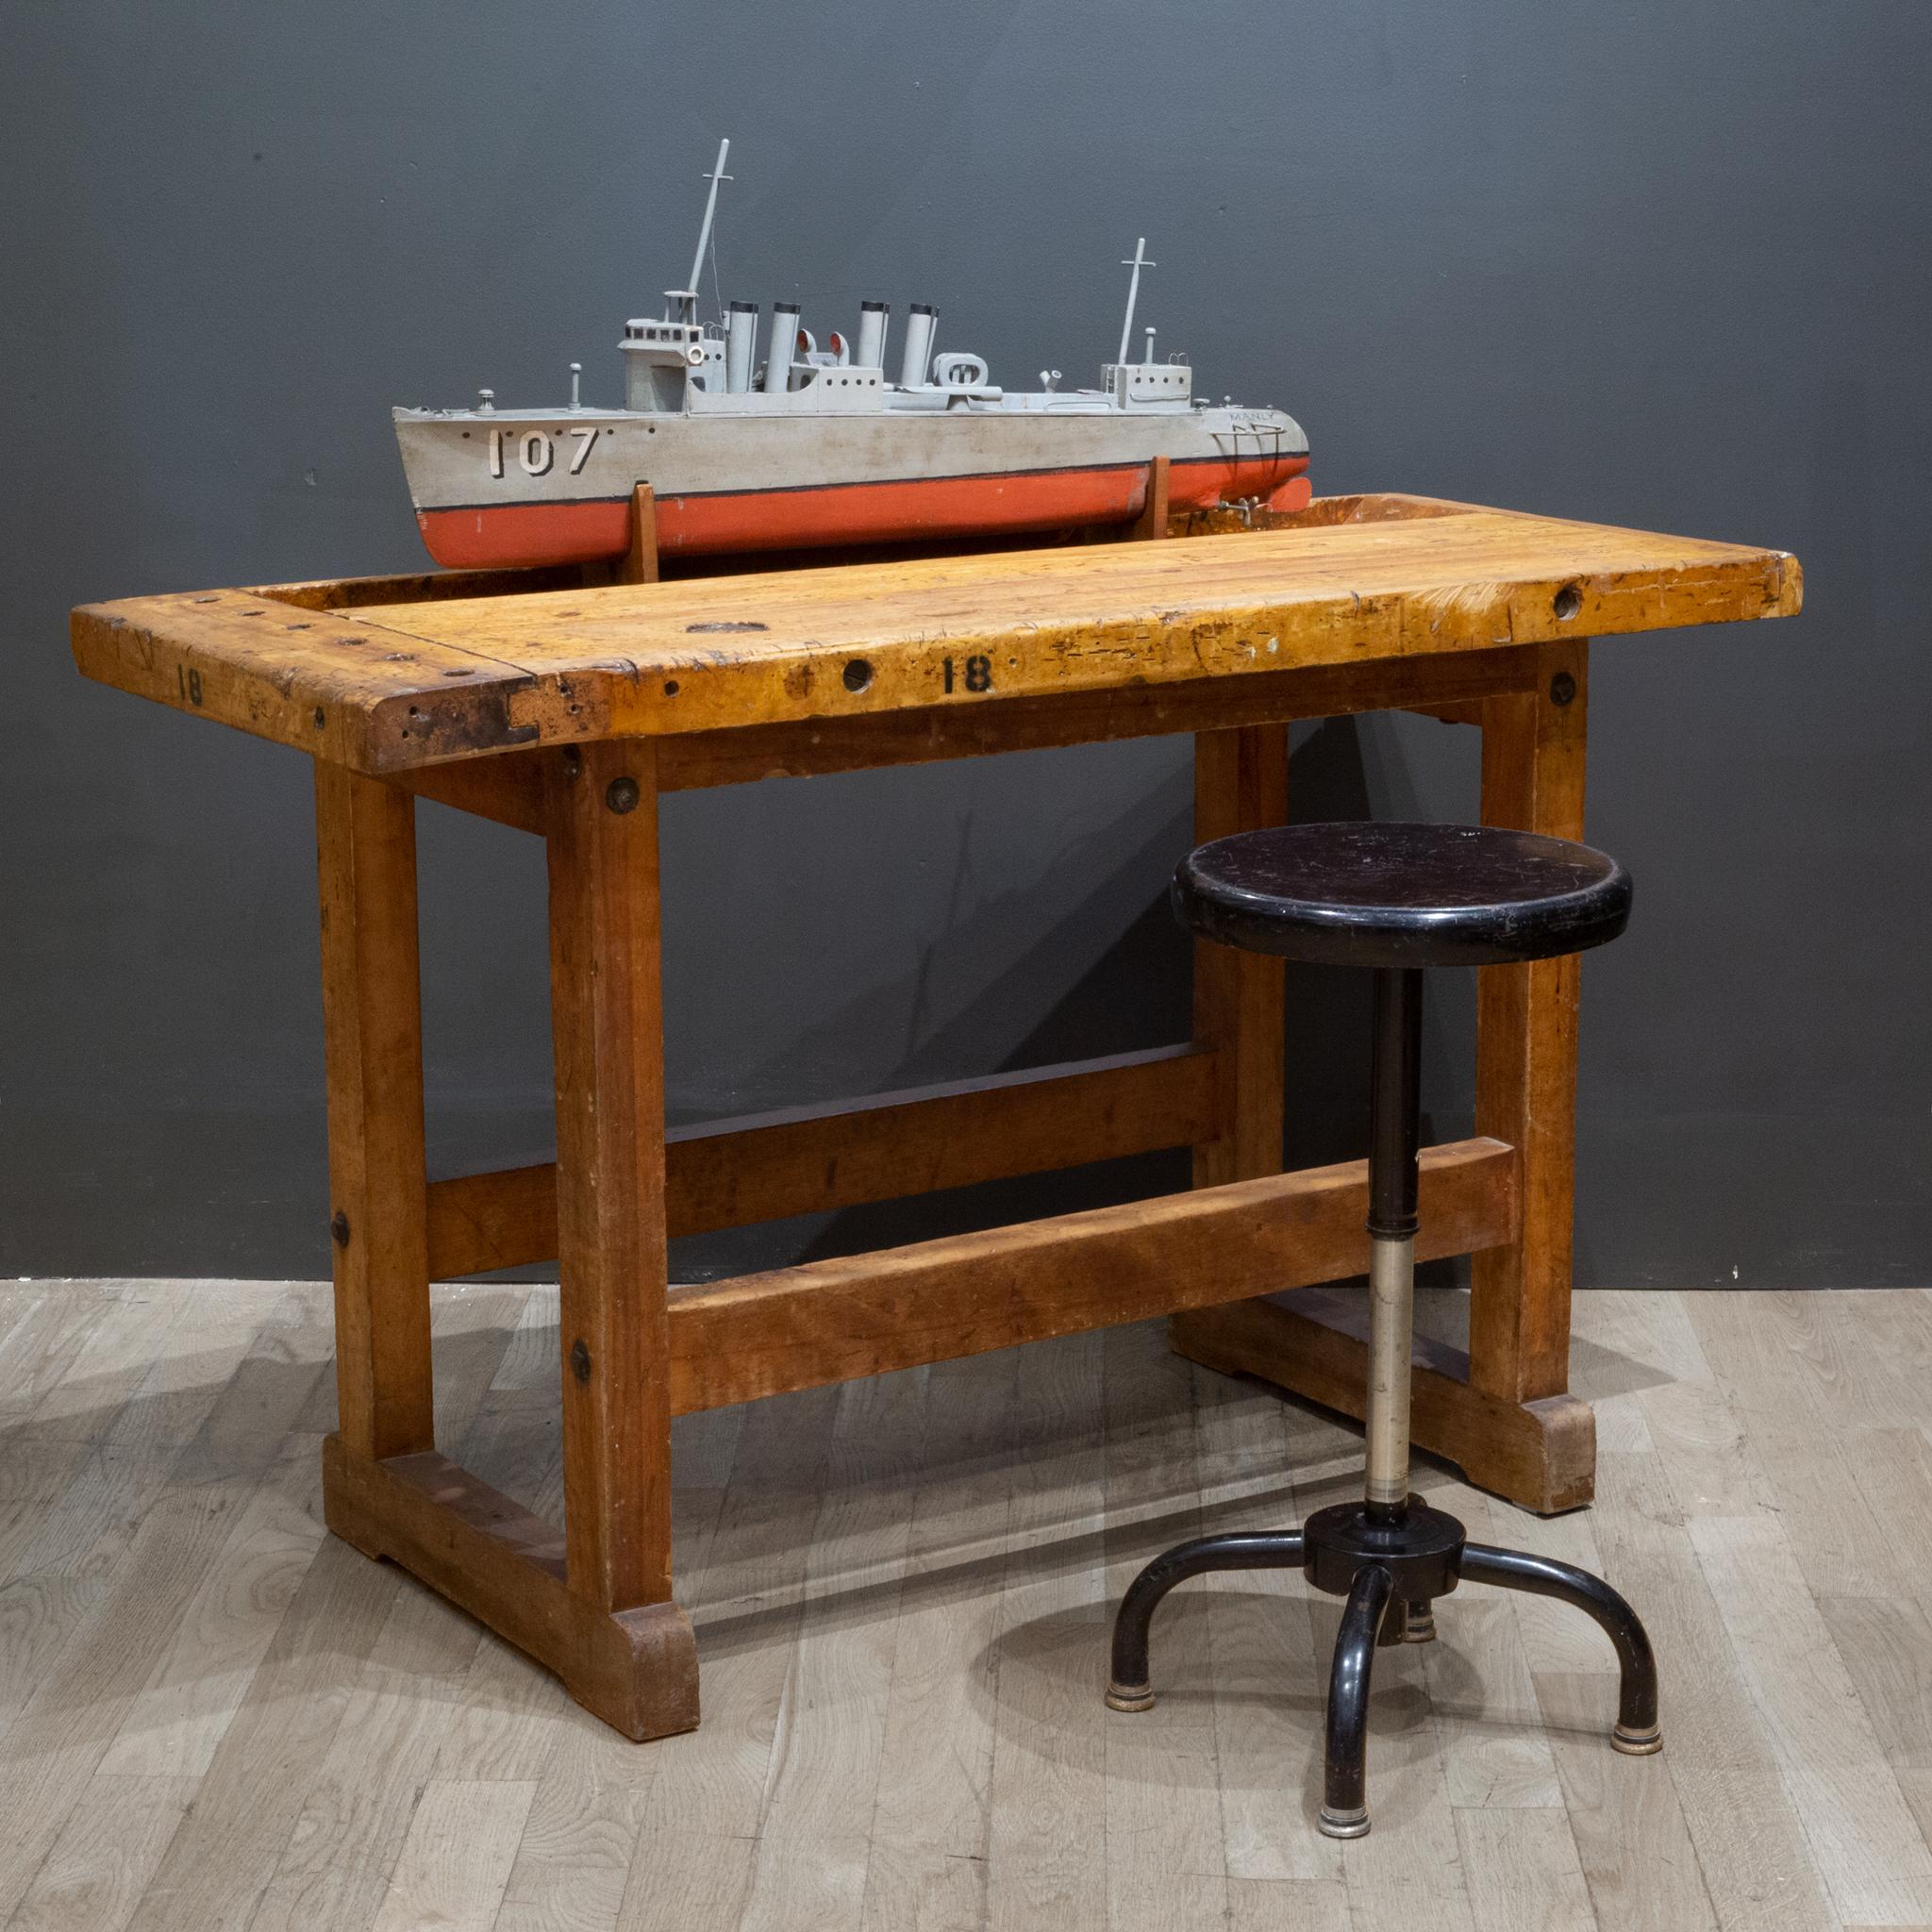 About

An turn of the century American carpenter's workbench. The work surface is beech with a tray on the side for tools and the base is Maple. The piece is structurally sound and very solid and has retained the naturally distressed look of an